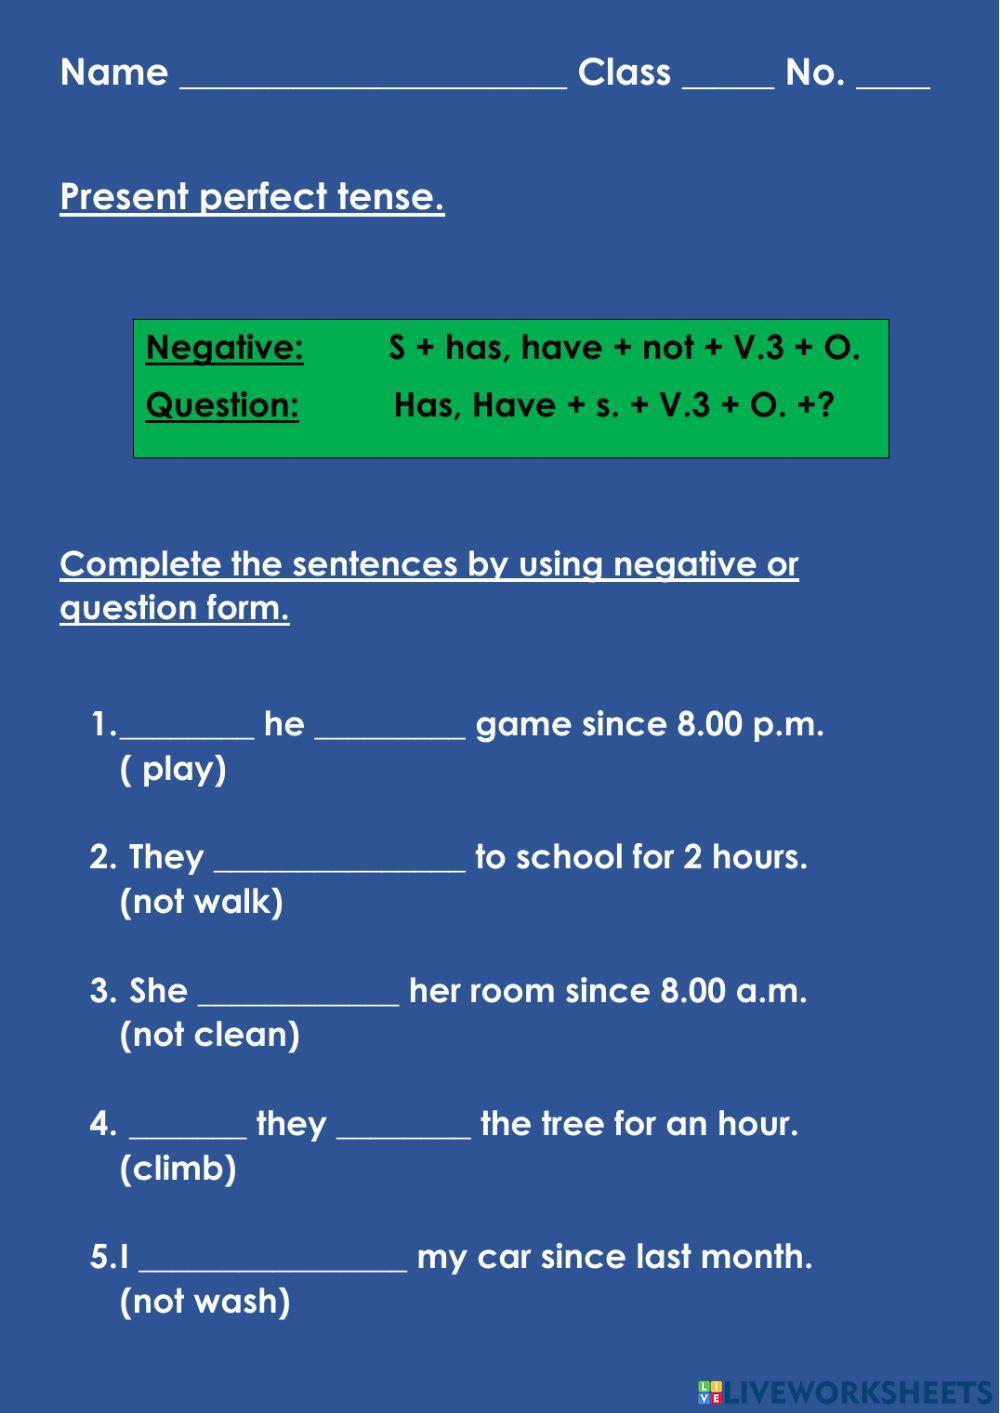 Present perfect negative and question.